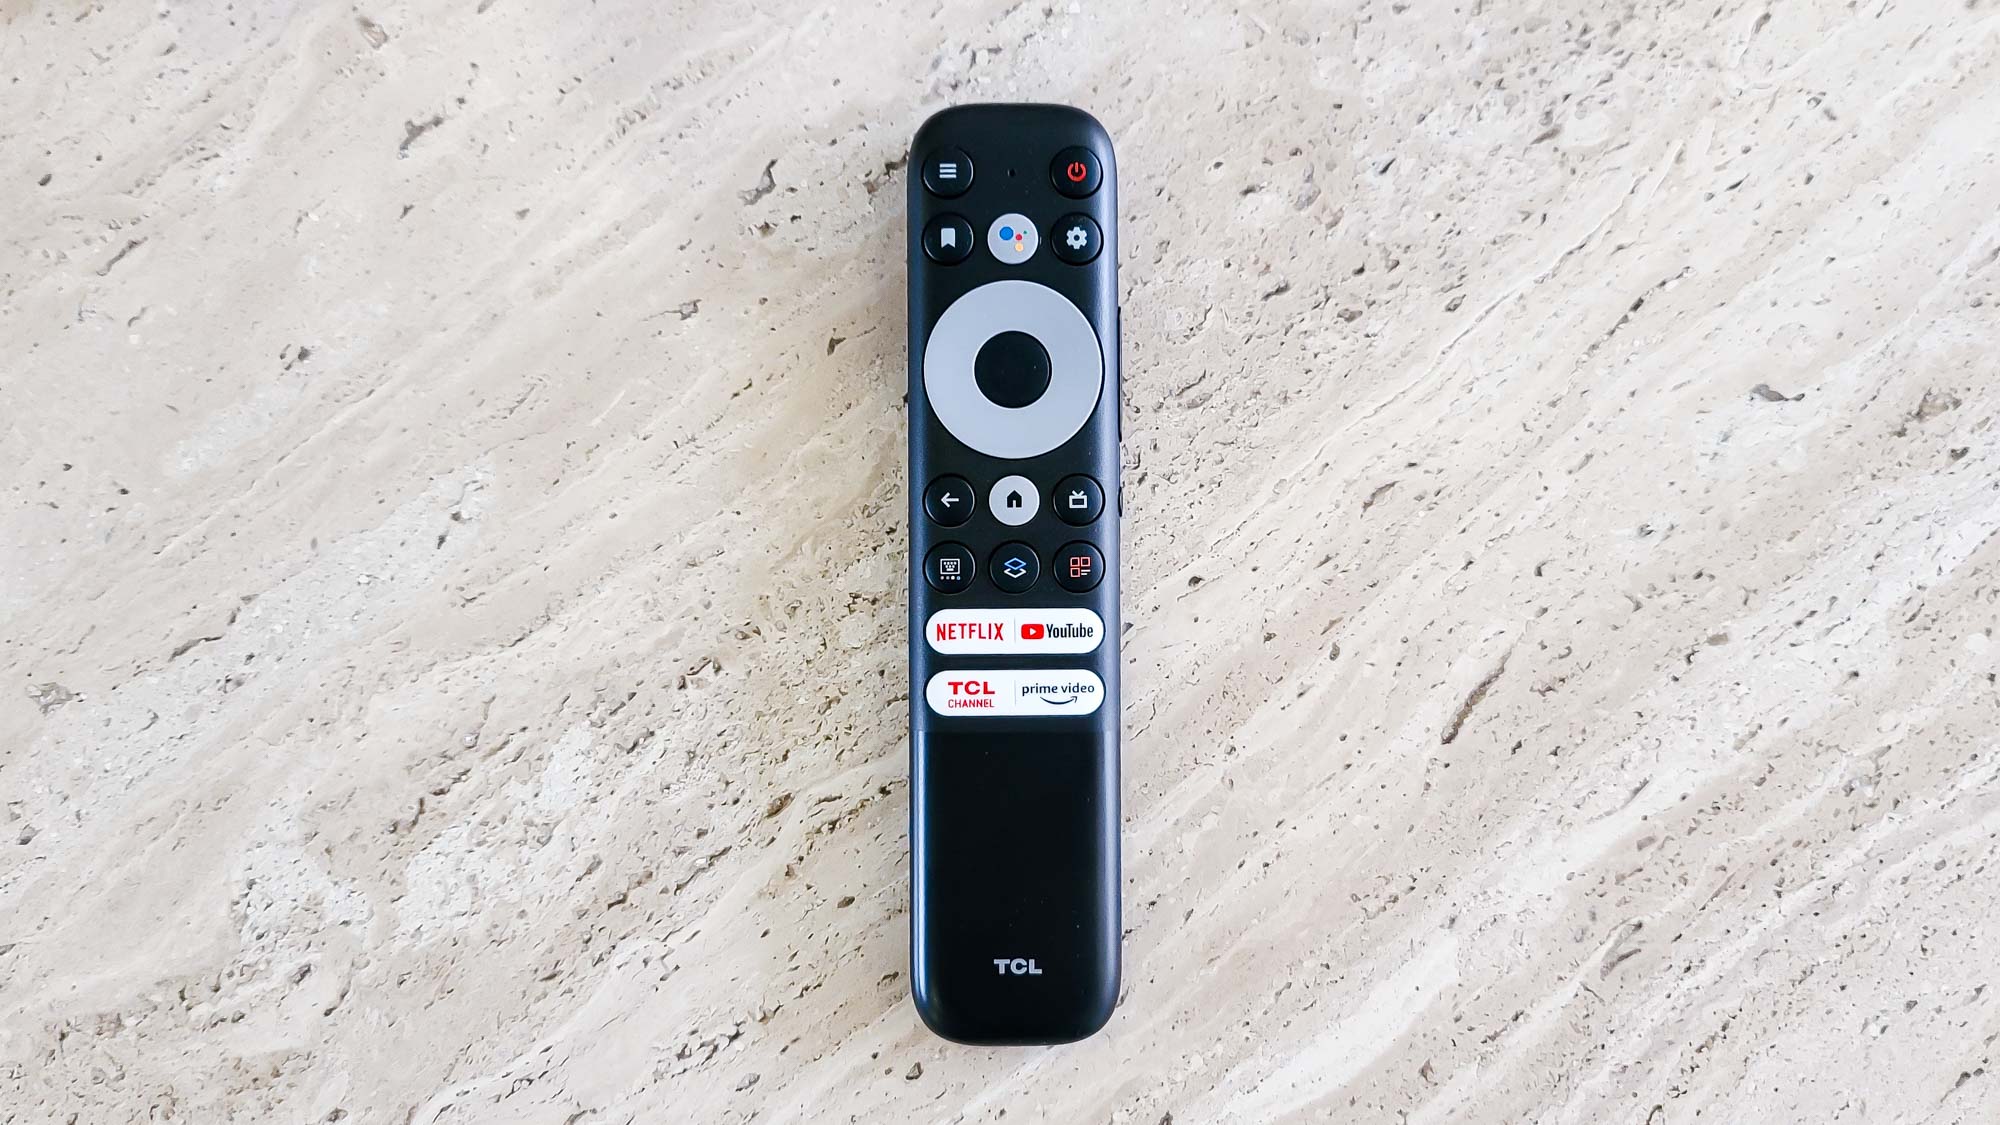 TCL 5-Series Google TV (S546) remote